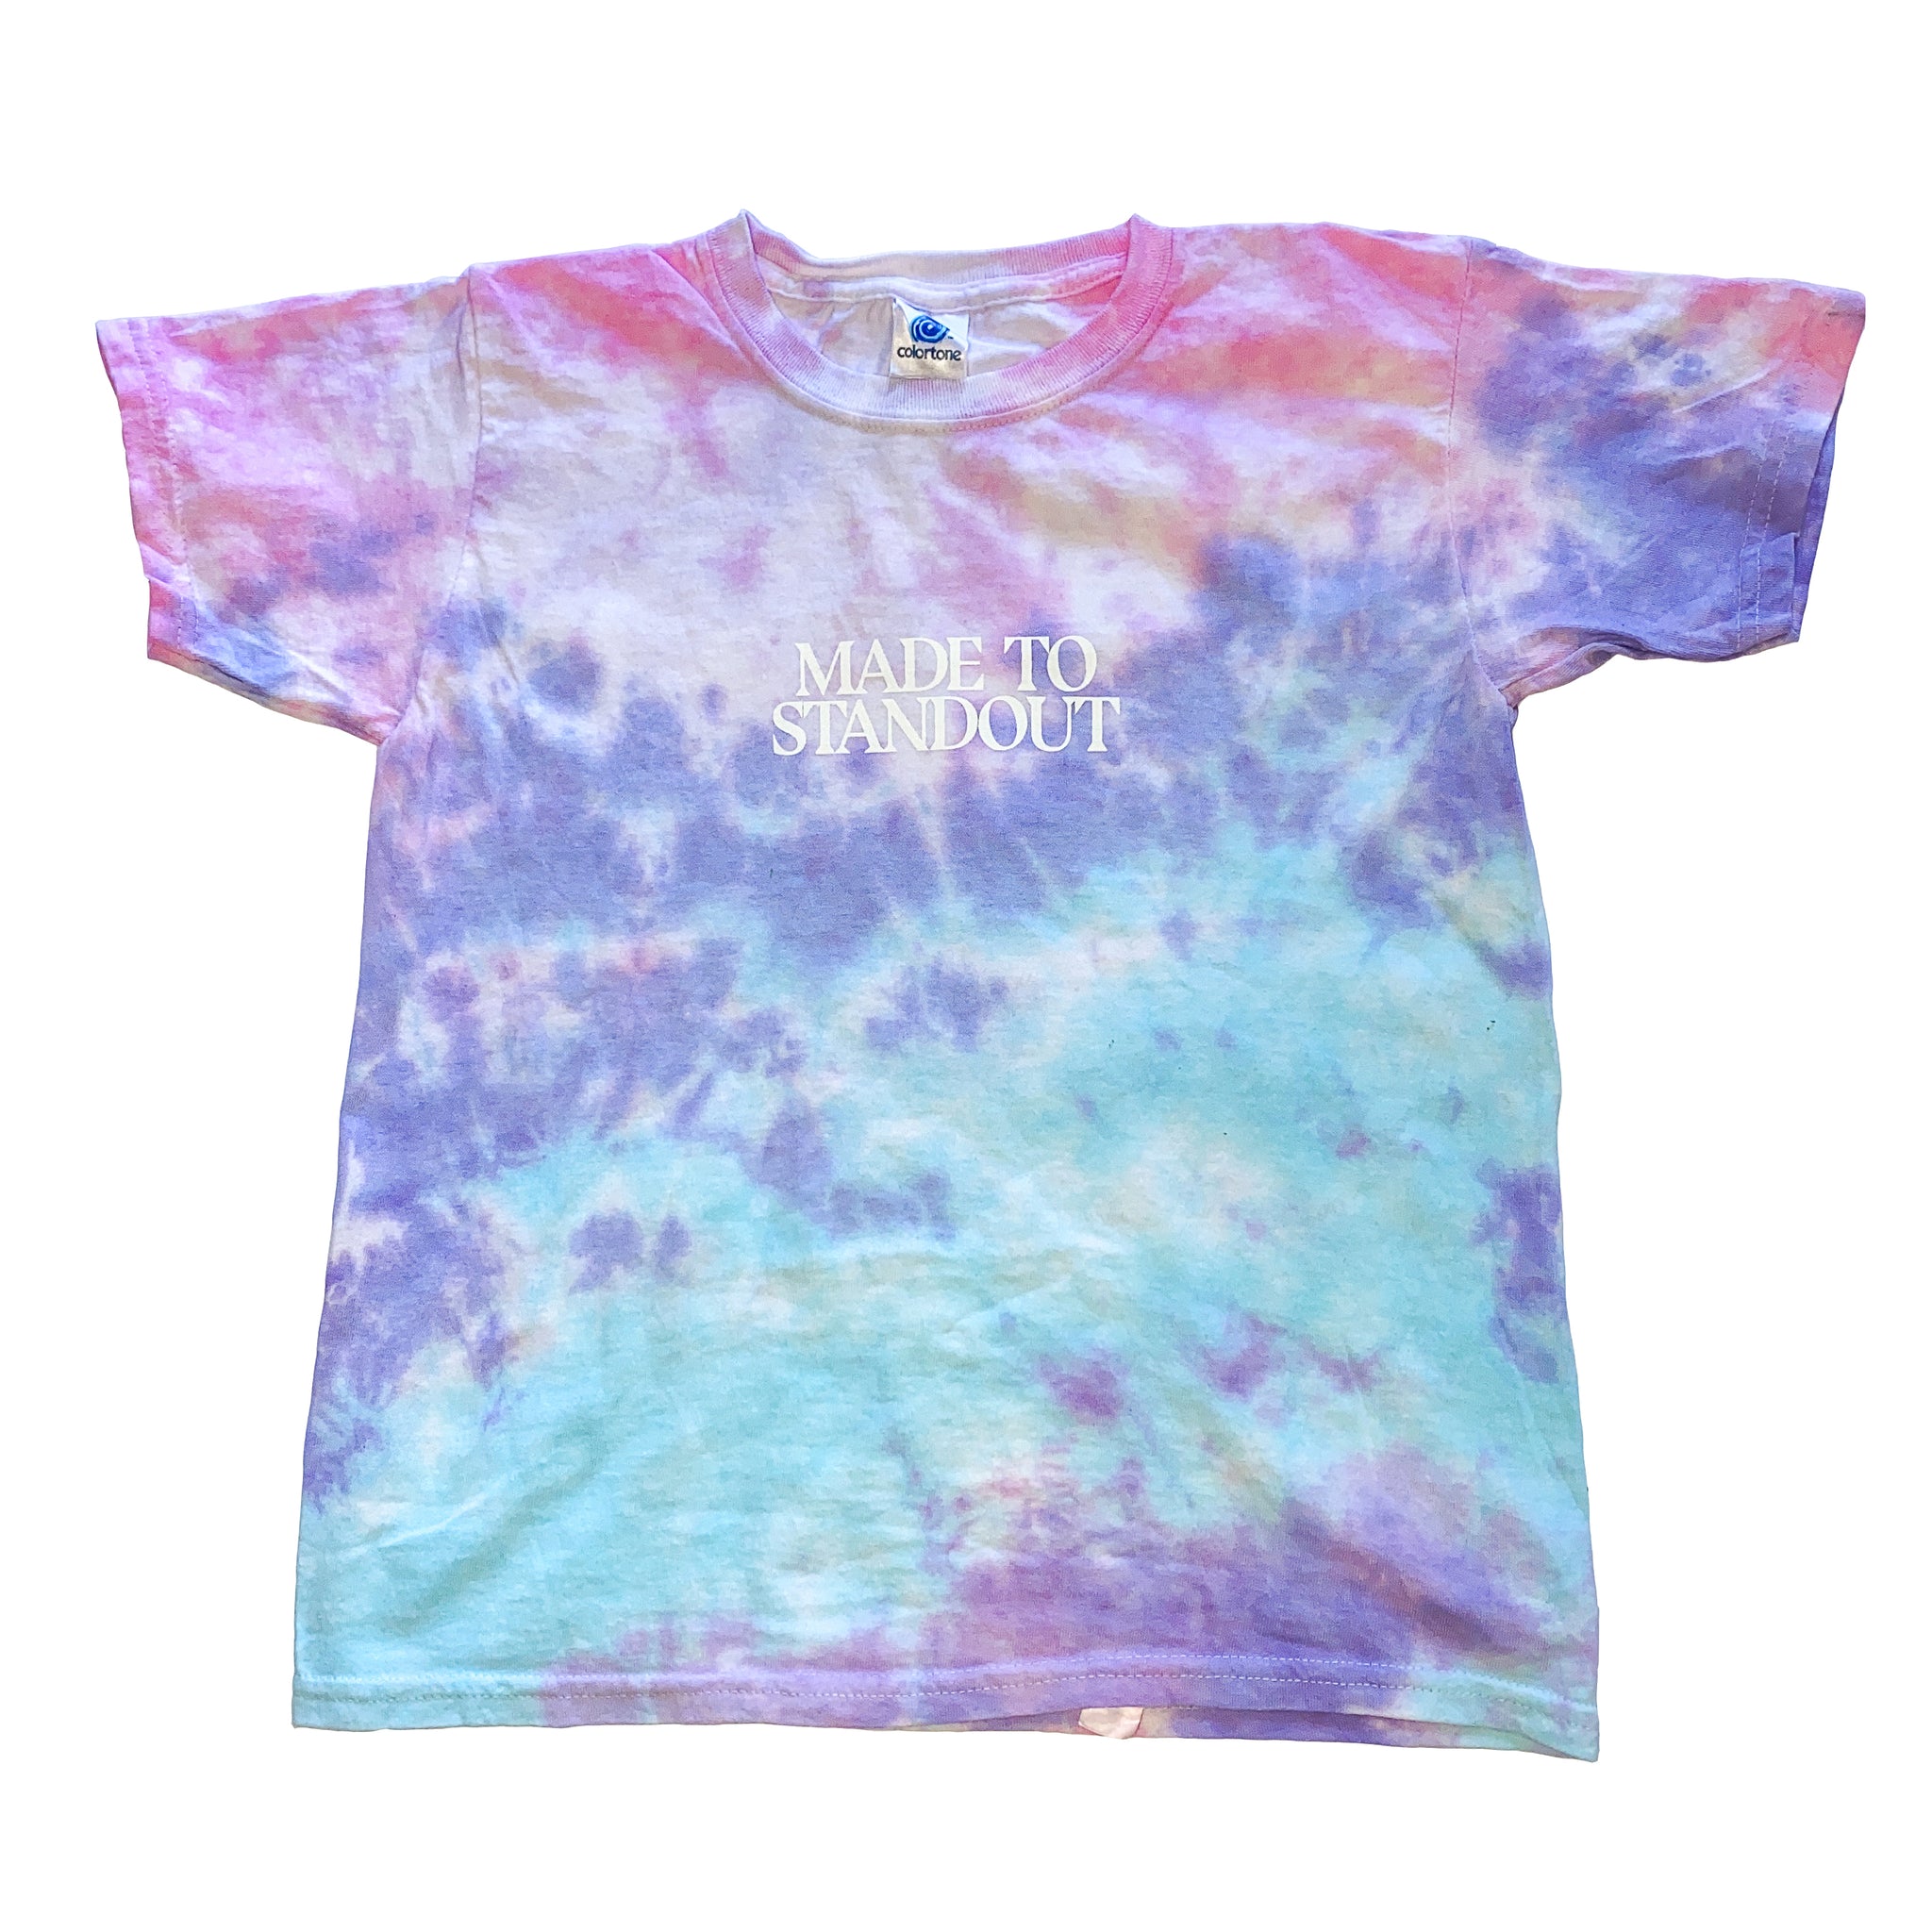 How was this tie-dyed t-shirt made?